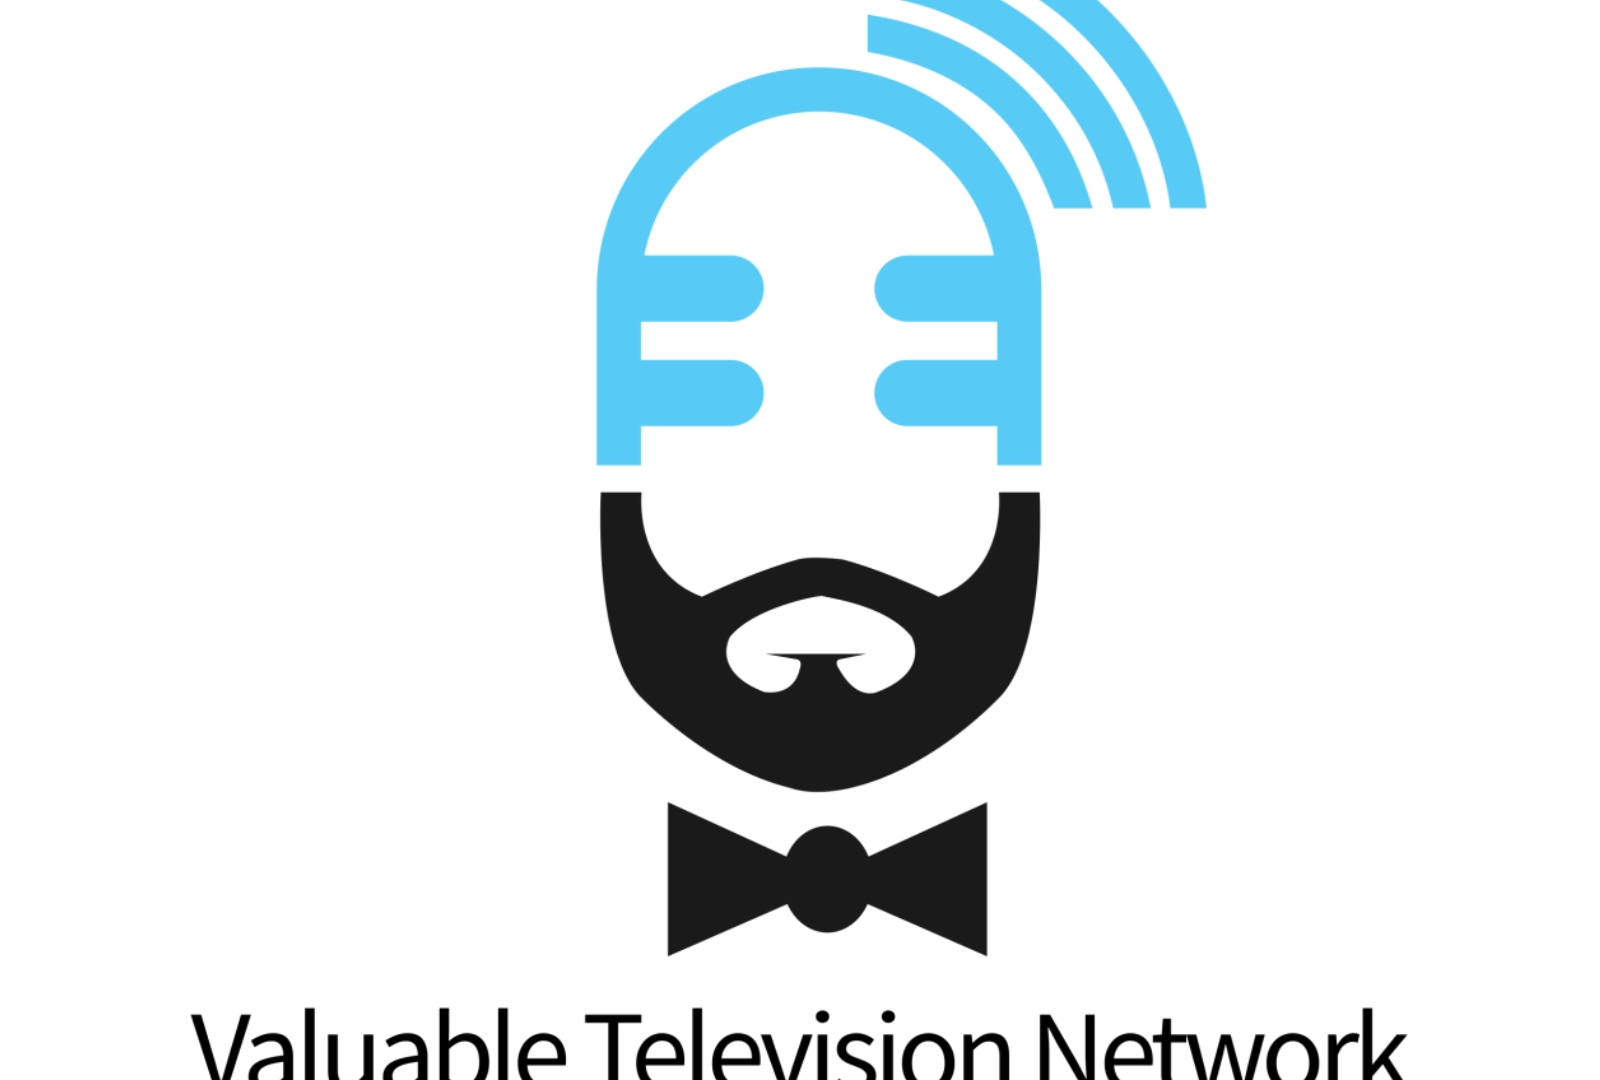 The Valuable Television Network